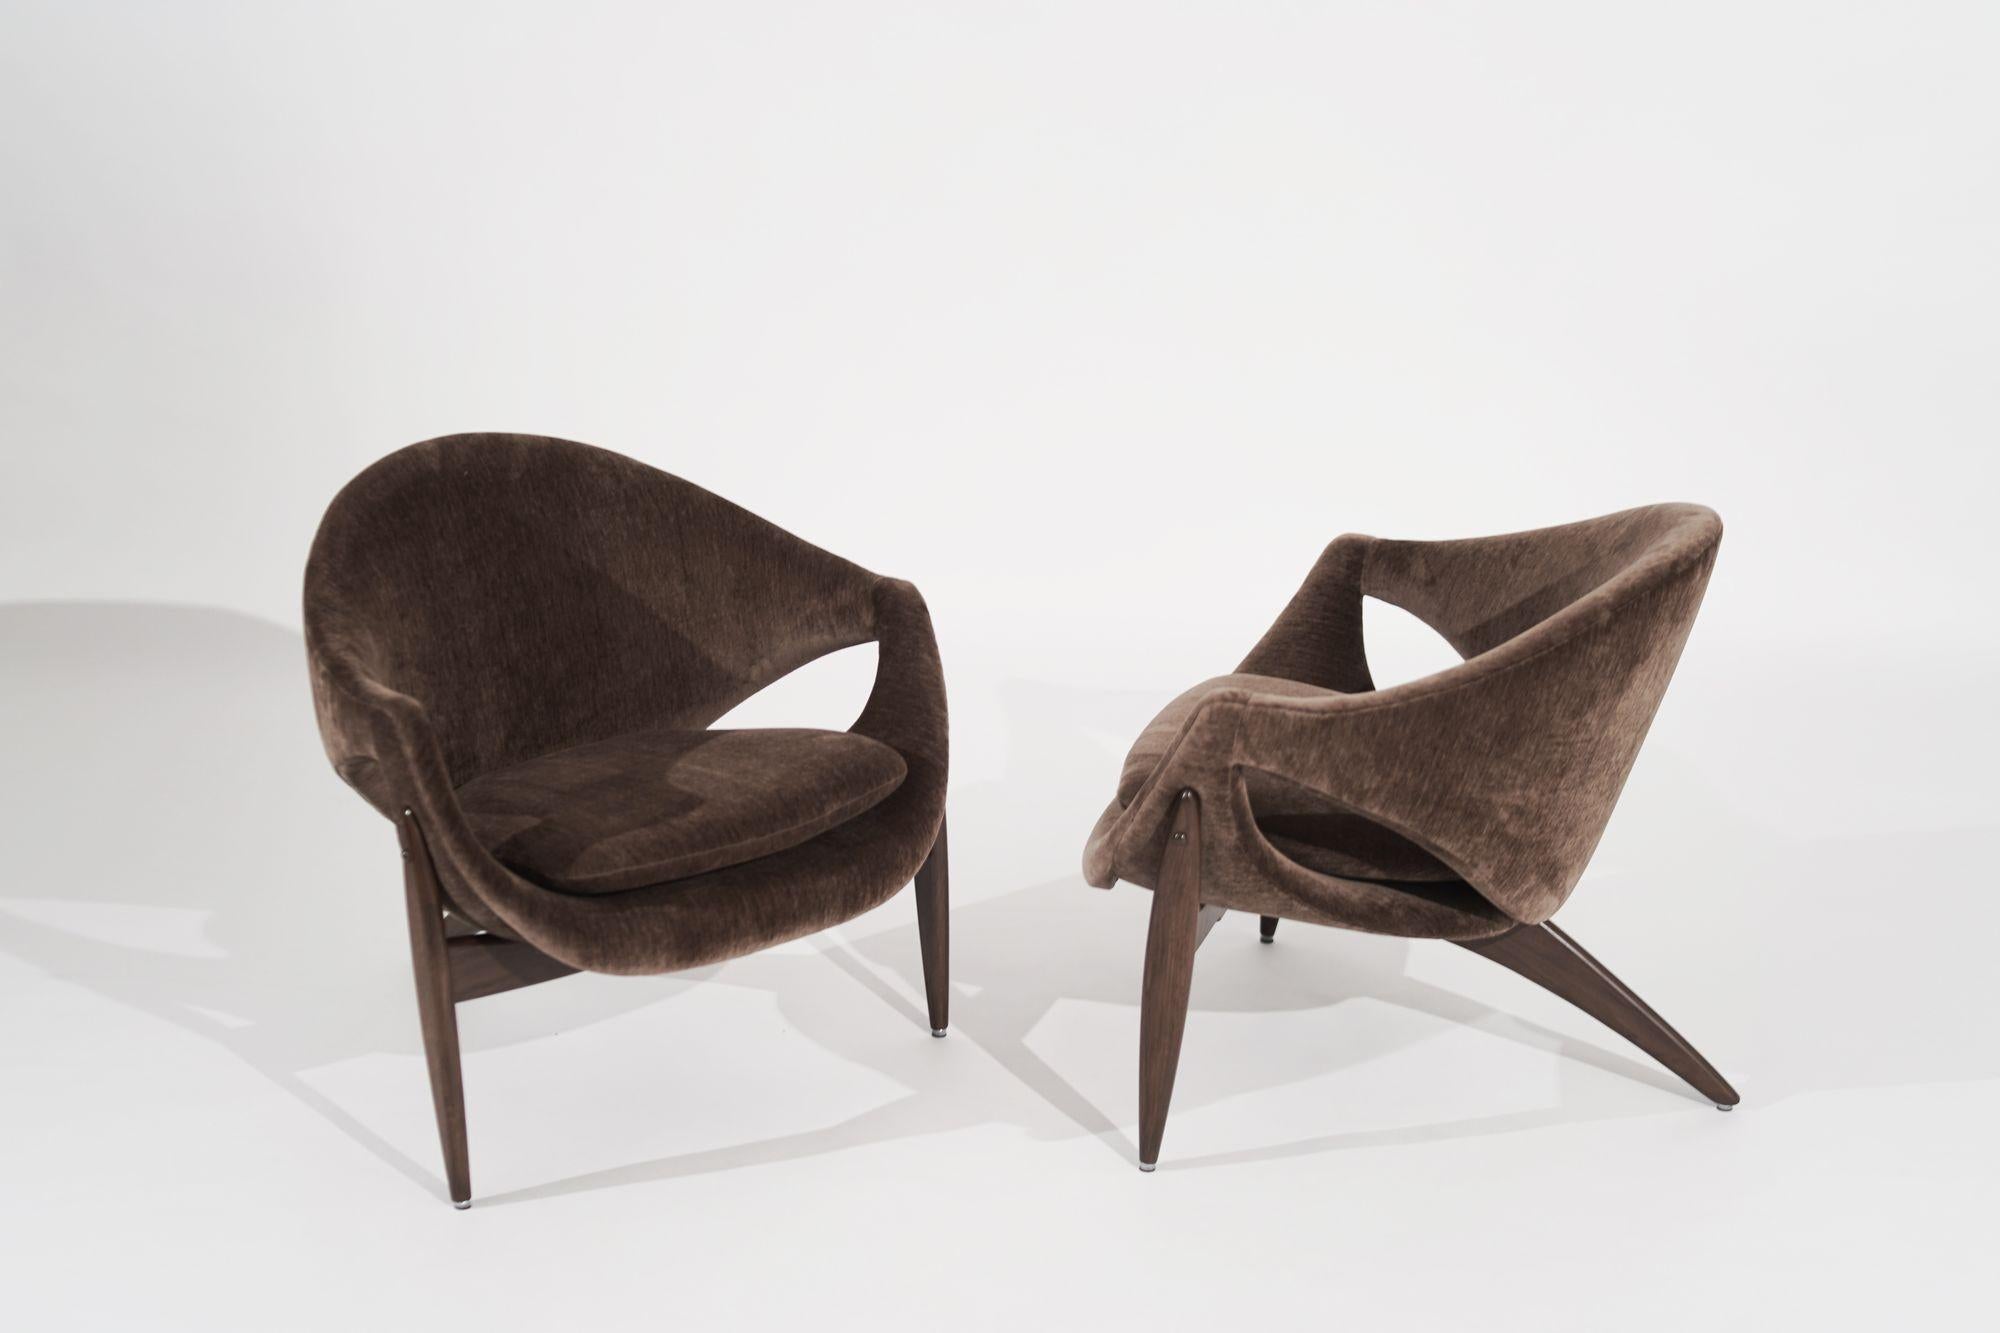 Stunning pair of chairs designed by Luigi Tiengo for Cimon in Montreal, Canada, circa 1960s, now completely restored to their original beauty by Stamford Modern.
Featuring a sculptural tripod walnut base that adds a touch of mid-century modern